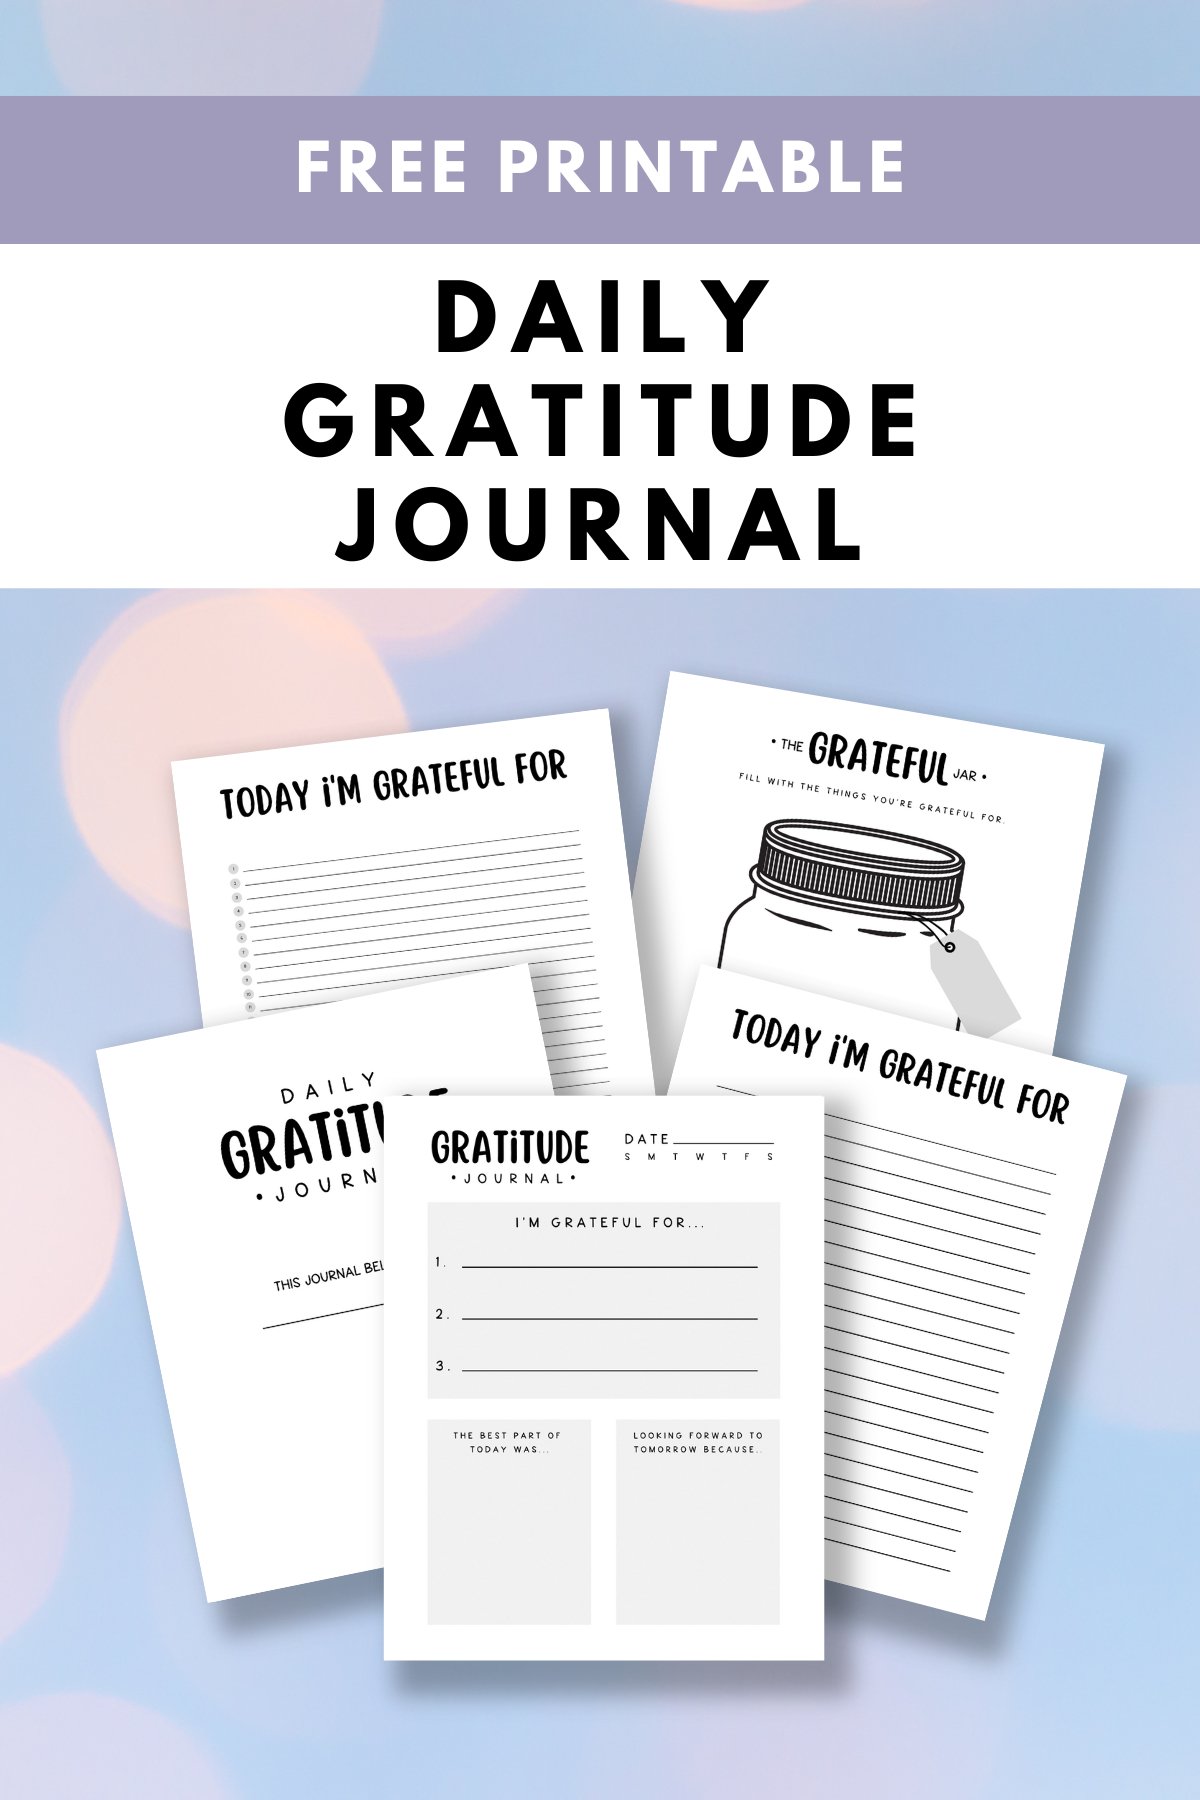 The 5 Best Gratitude Journals To Use In 2023